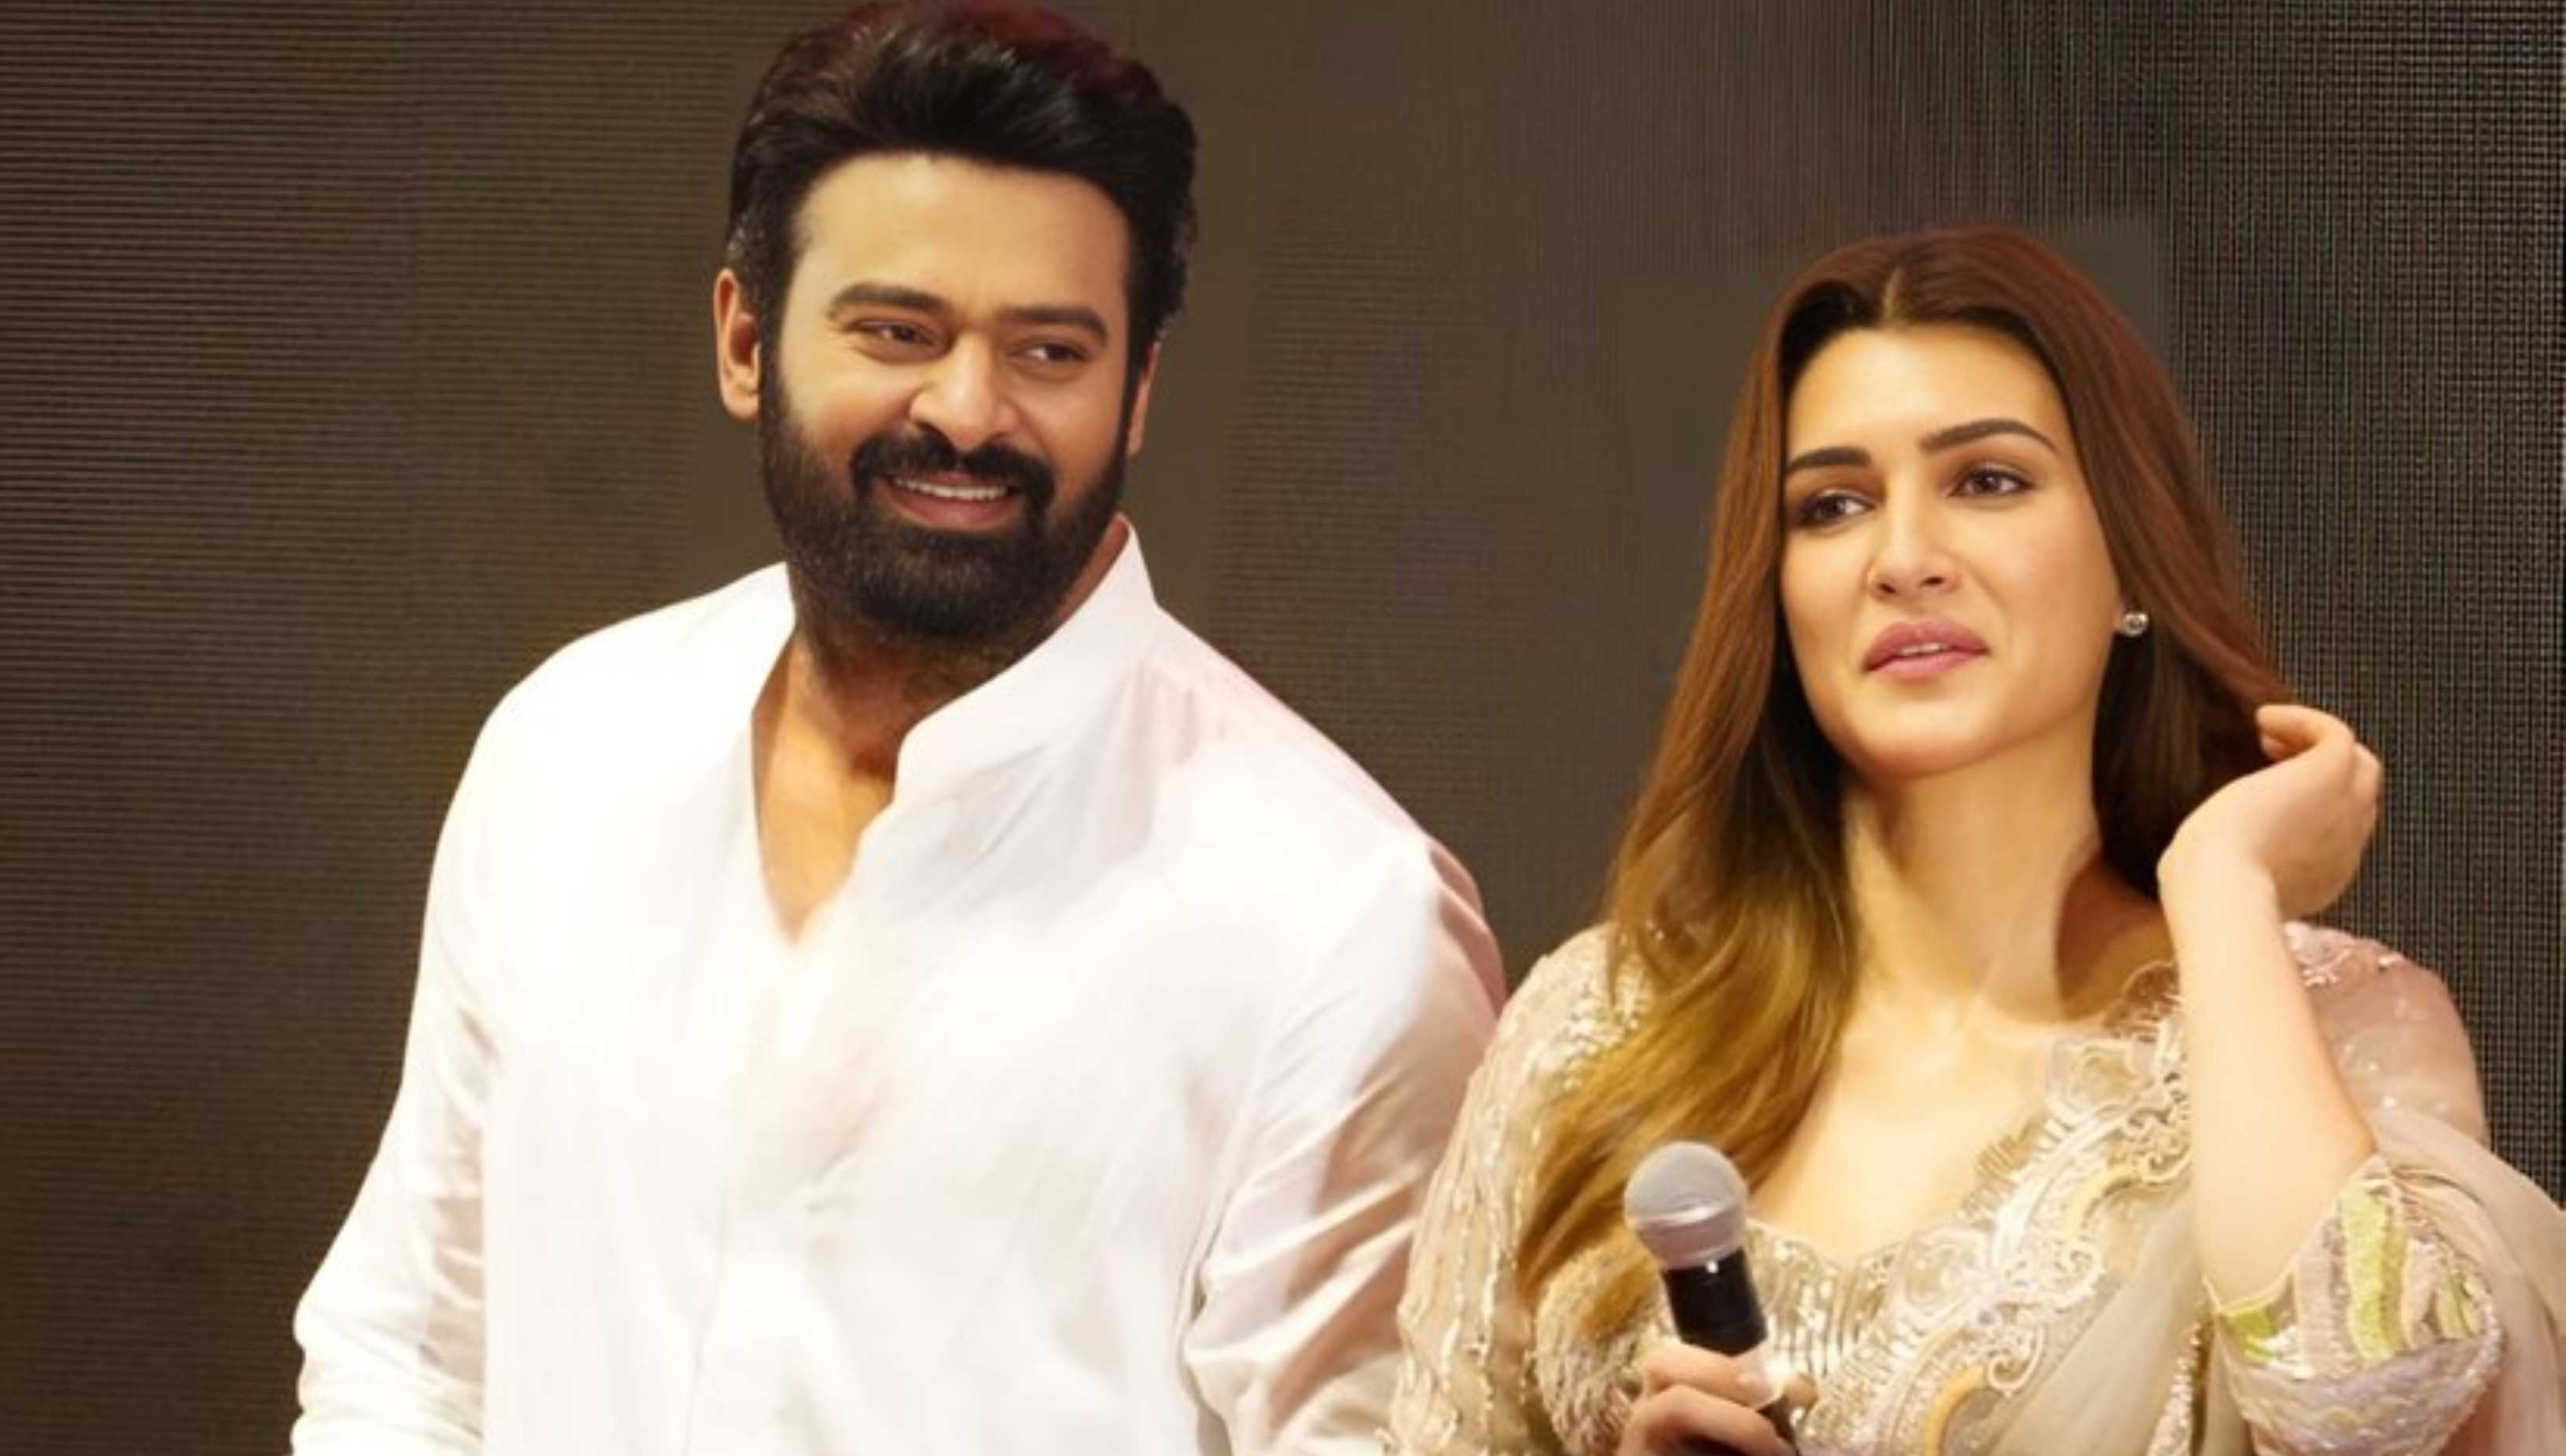 Adipurush jodi Prabhas and Kriti Sanon to get engaged soon? Here’s what we know about the proposal